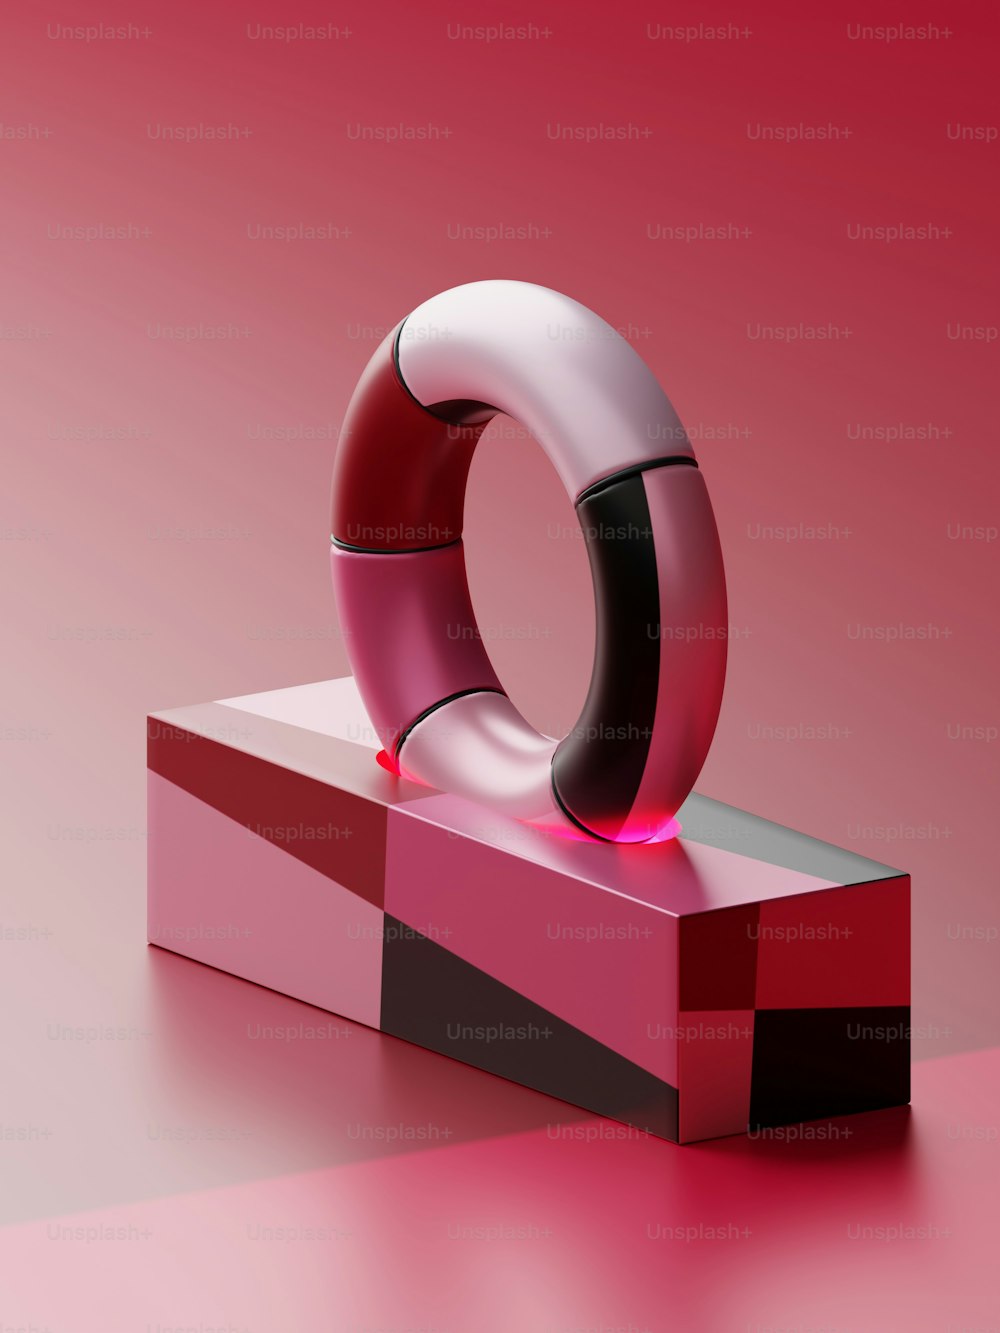 a red and black object on a pink surface